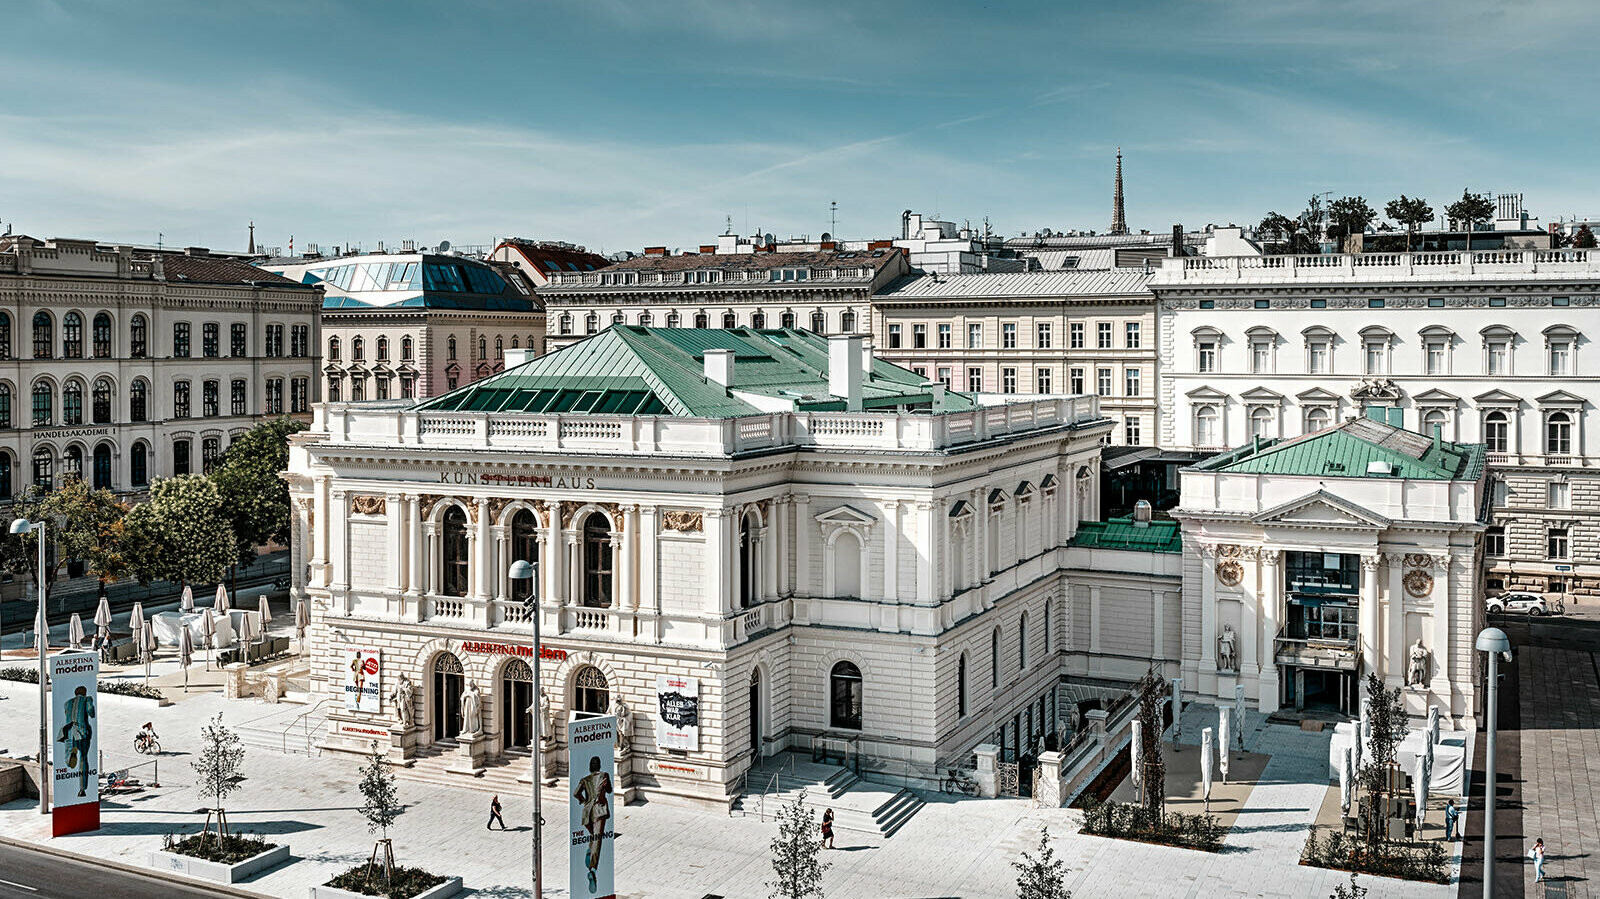 You can see the Künstlerhaus in Vienna, surrounded by other buildings.